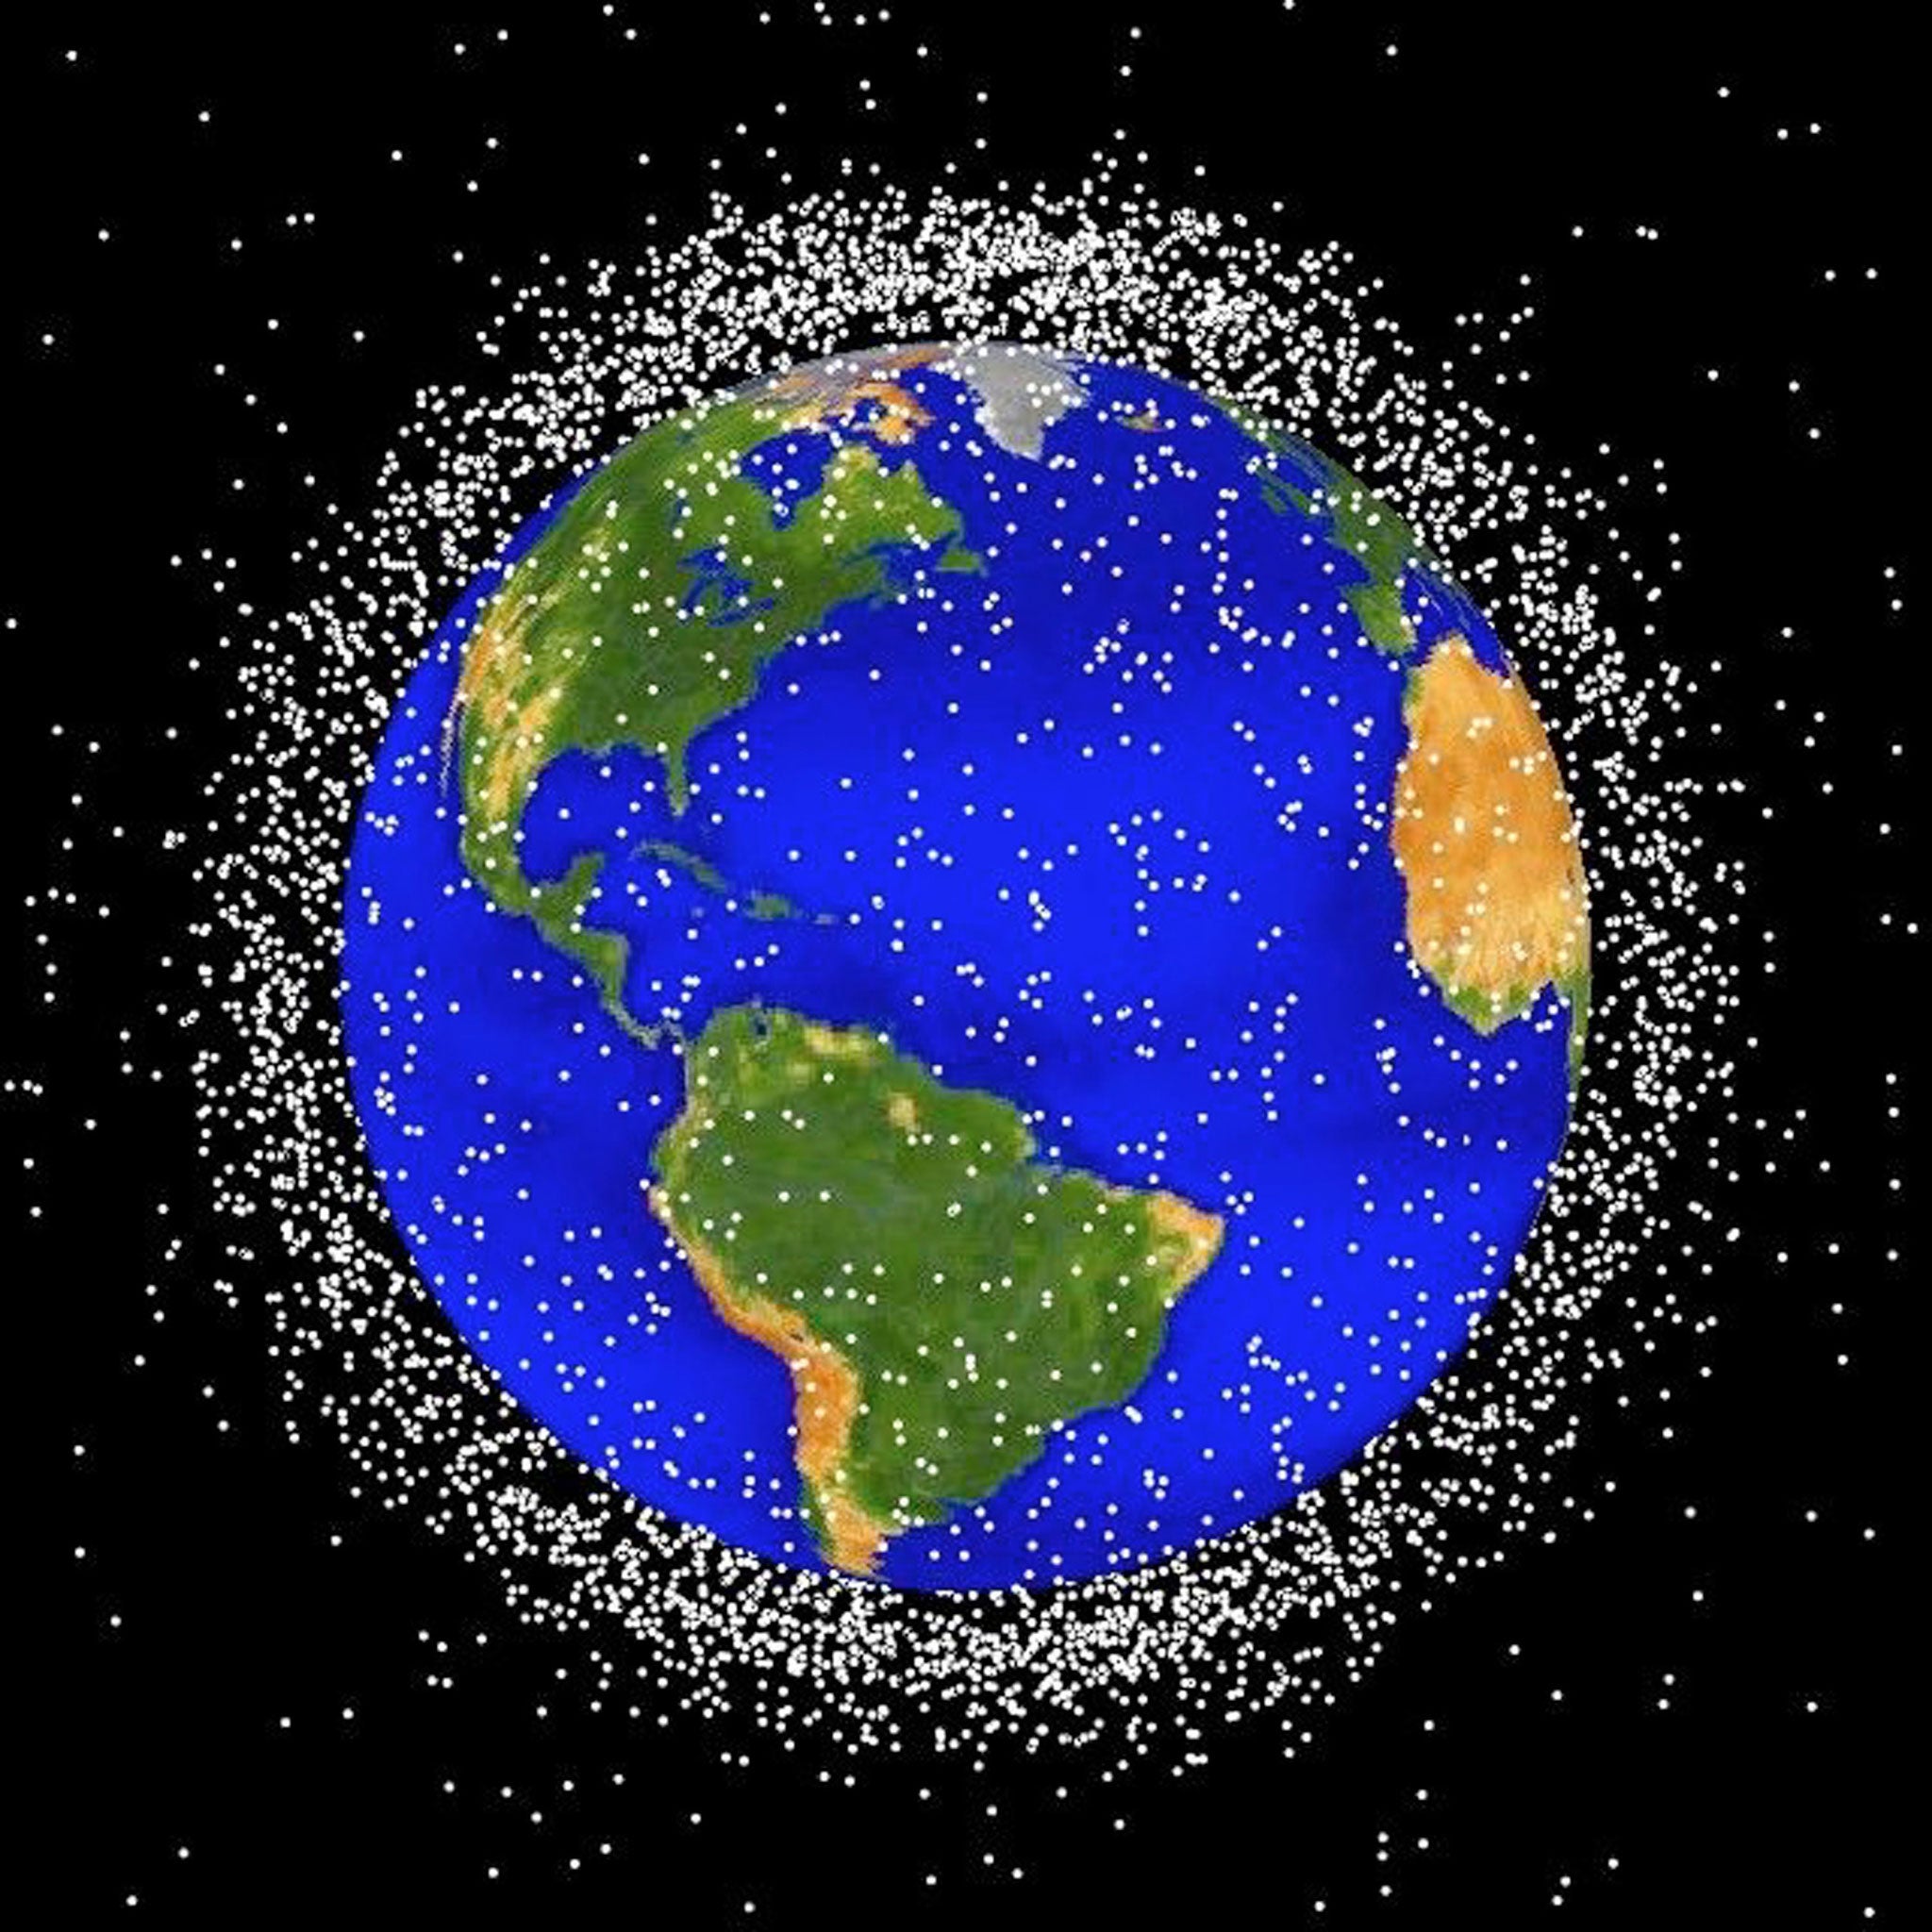 A graphical representation of the debris surrounding Earth. Experts estimate there are as many as 300,000 pieces of space junk orbiting the planet